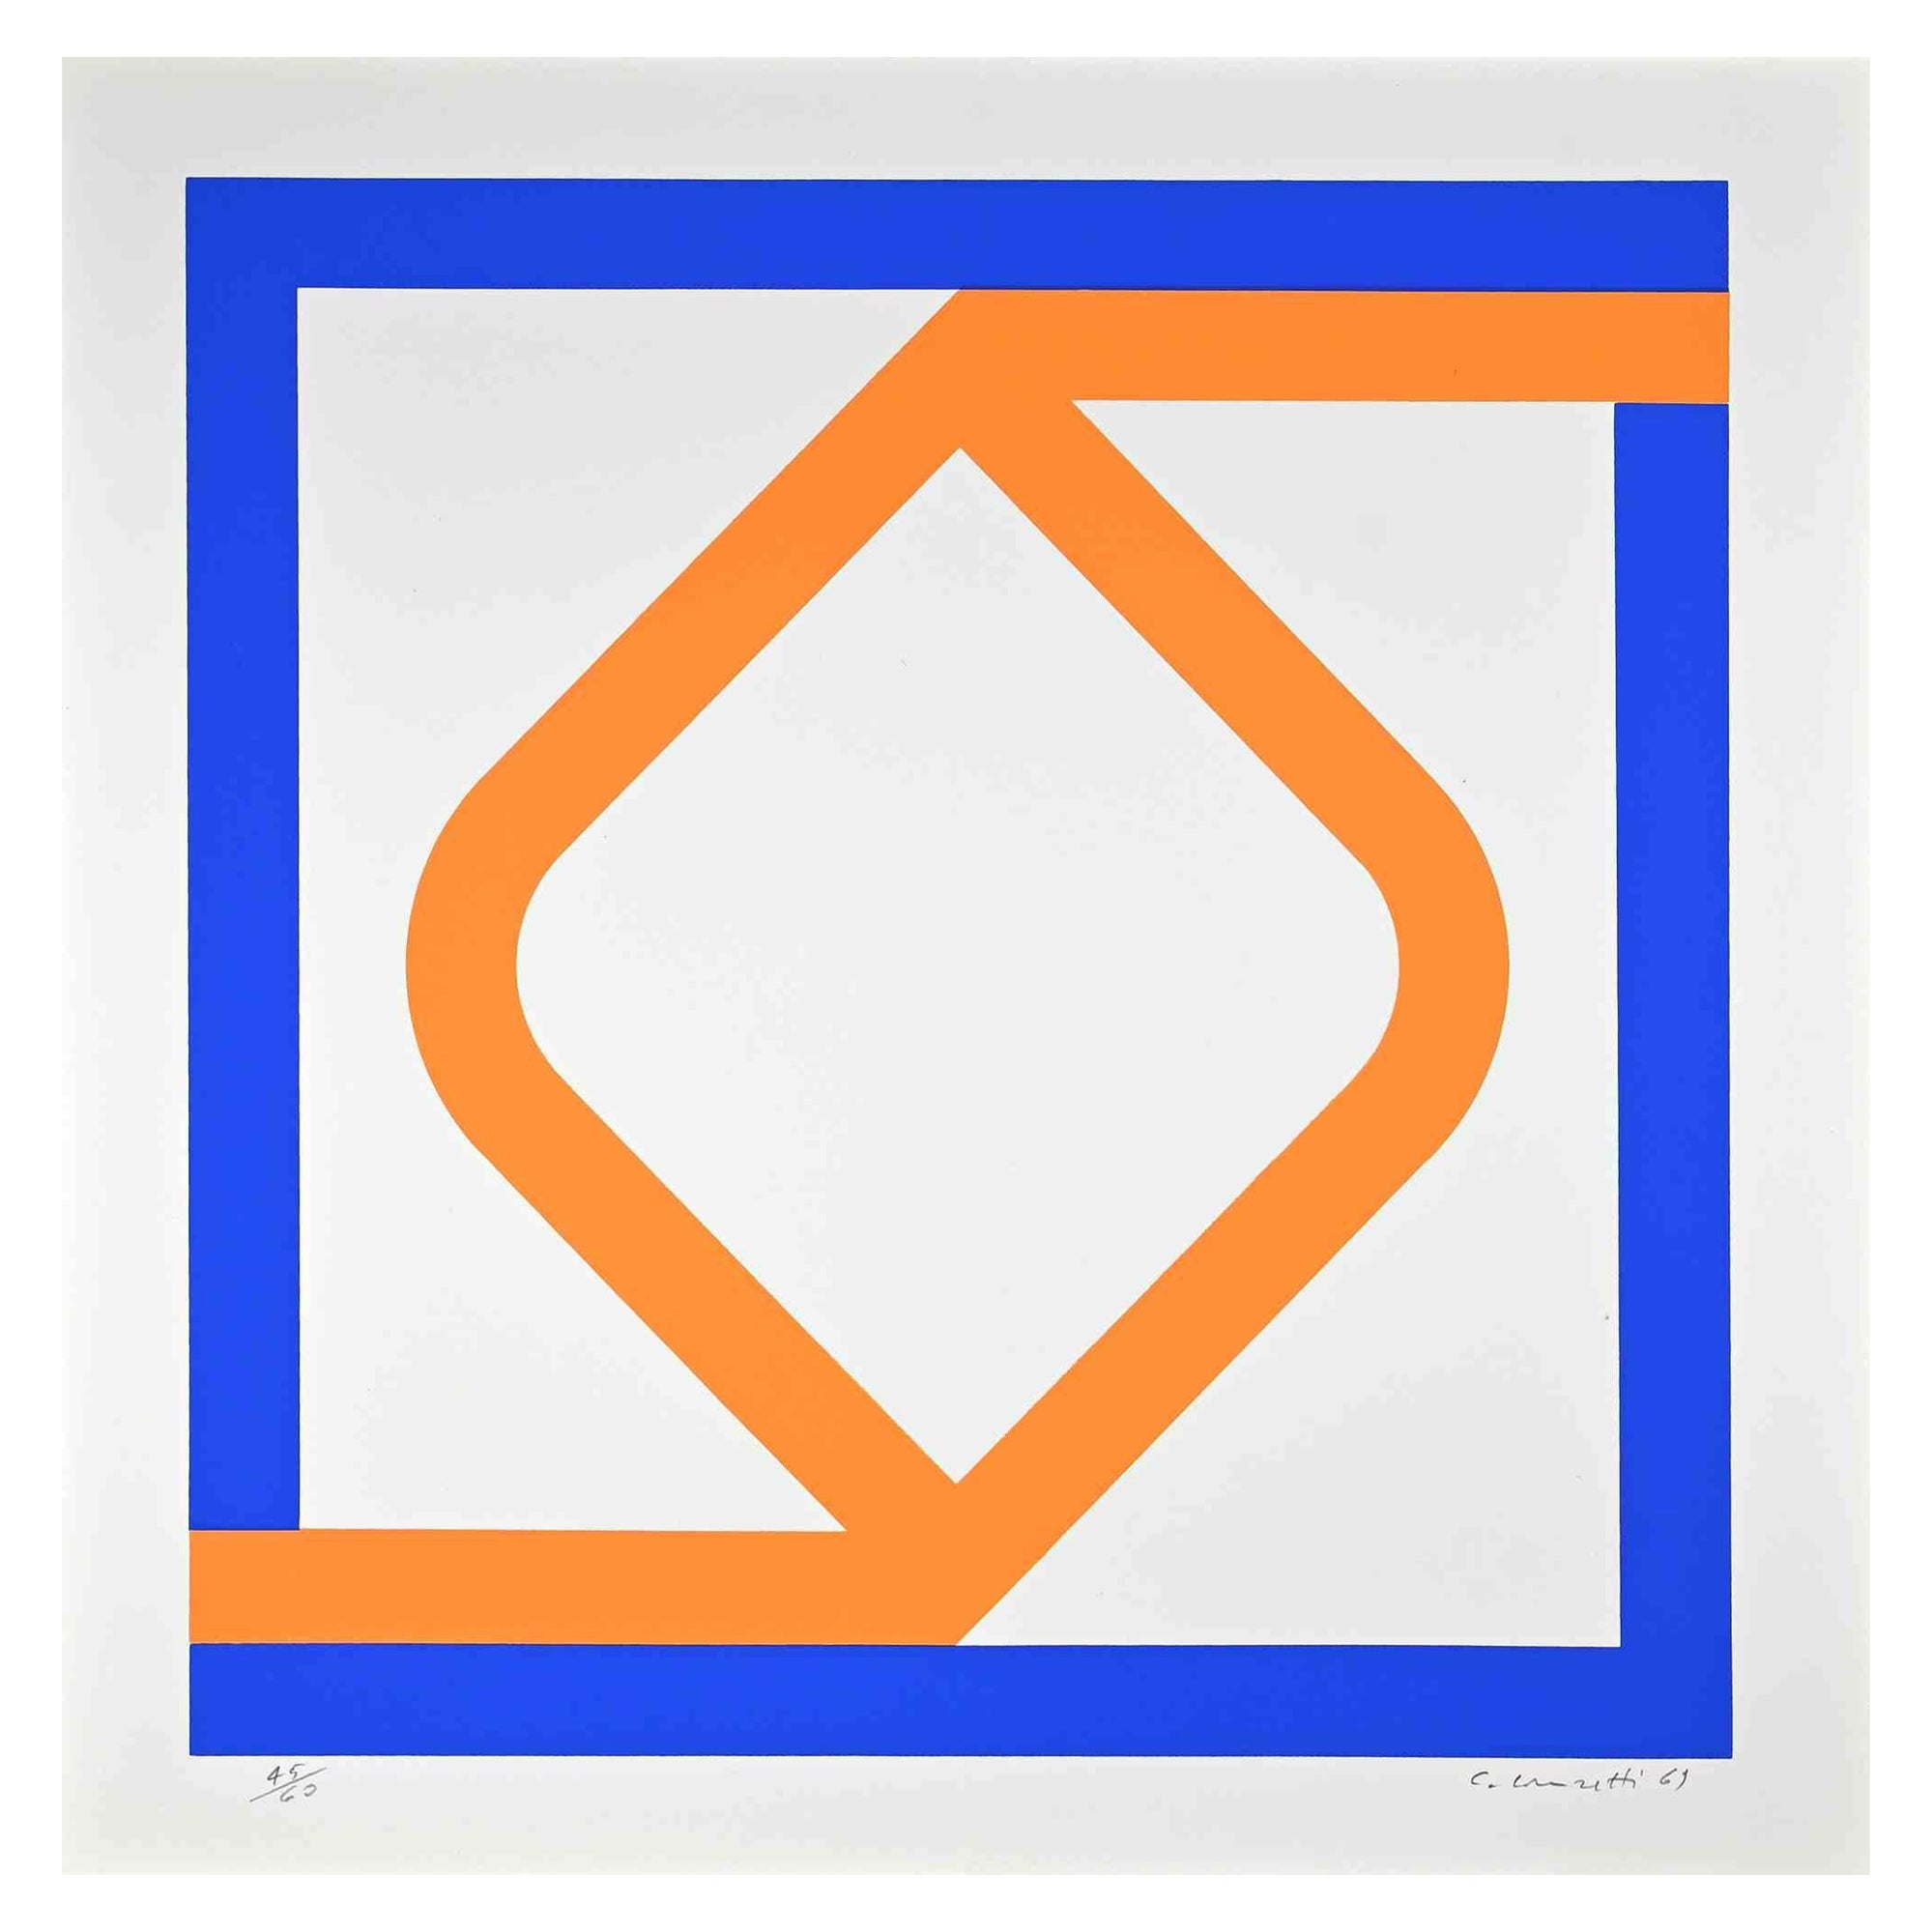 Abstract composition is an original screen print realized by Carlo Lorenzetti in 1969.

Editor Segnapassi Pesaro.

hand-signed.

Numbered, Edition, 45/60.

Carlo Lorenzetti (Venice, 1858 - Venice, 1945) an Italian sculptor and artist. After